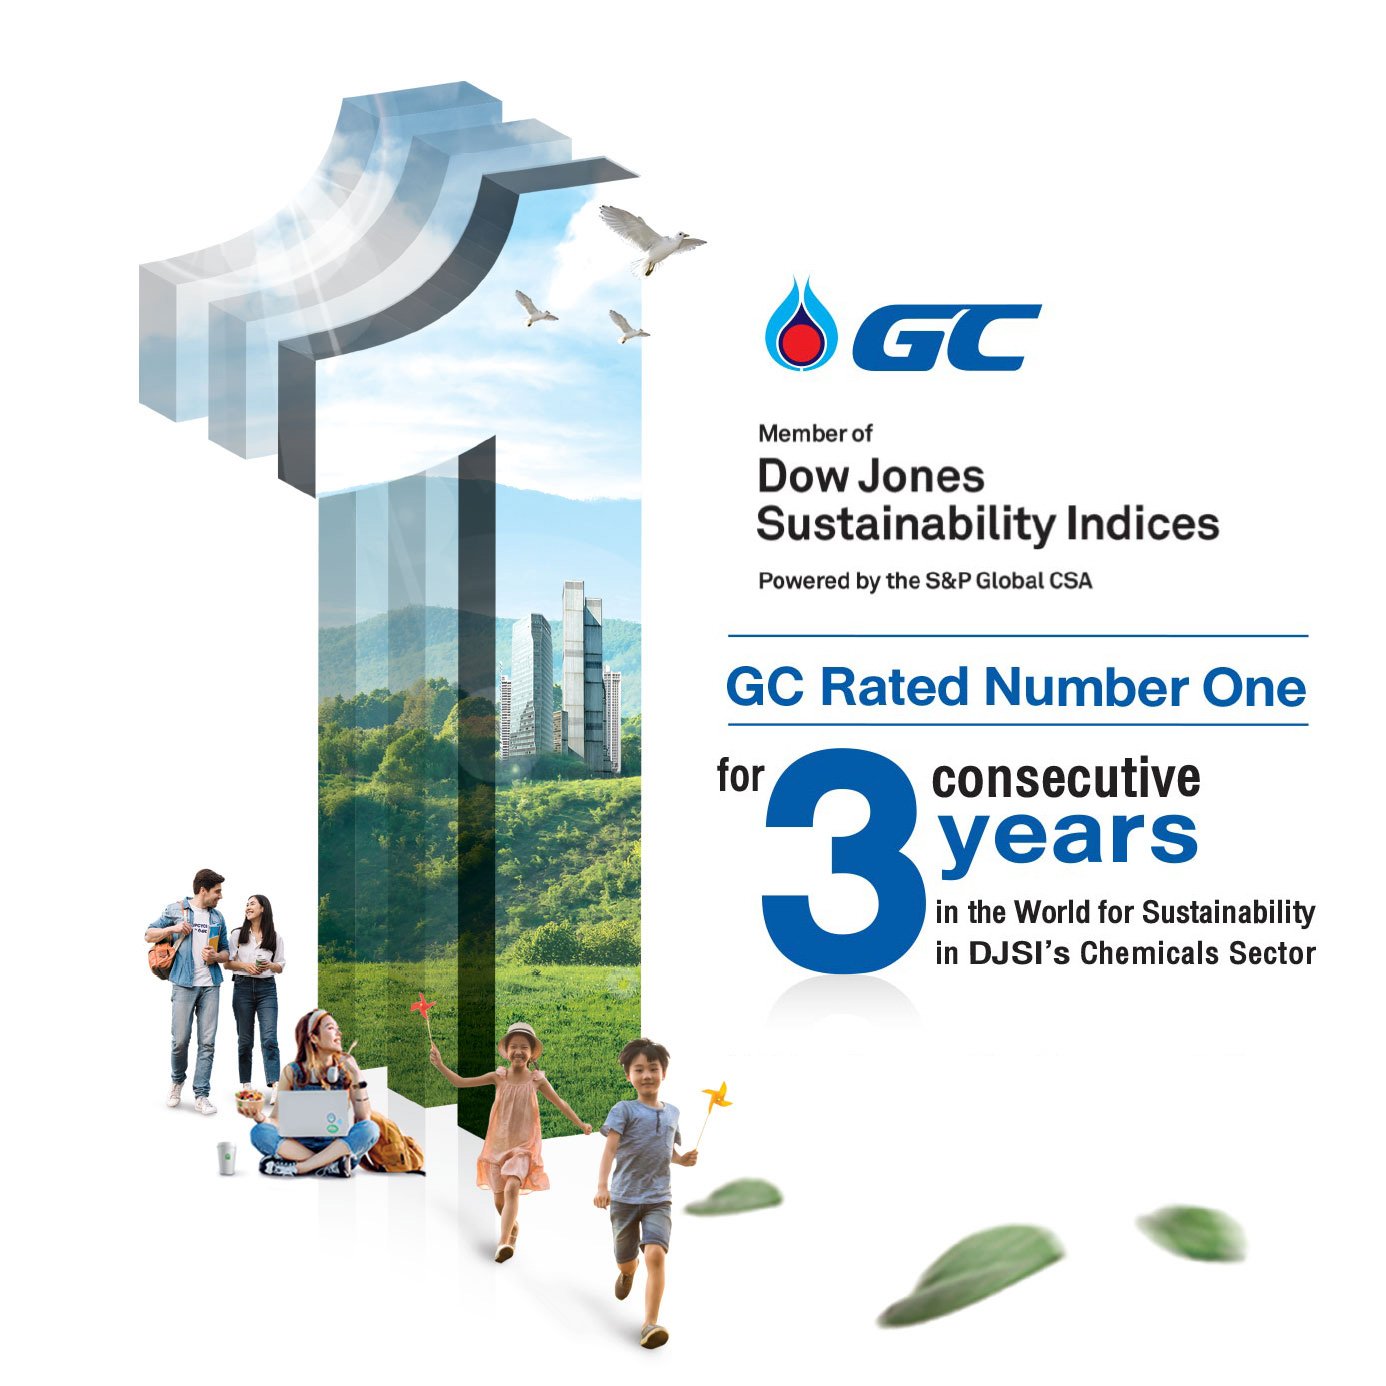 GC, Thailand’s leading petrochemical company, ranked No. 1 in the world by DJSI for 3 consecutive years in the Chemicals business and gets ready to move towards being a Net Zero organization